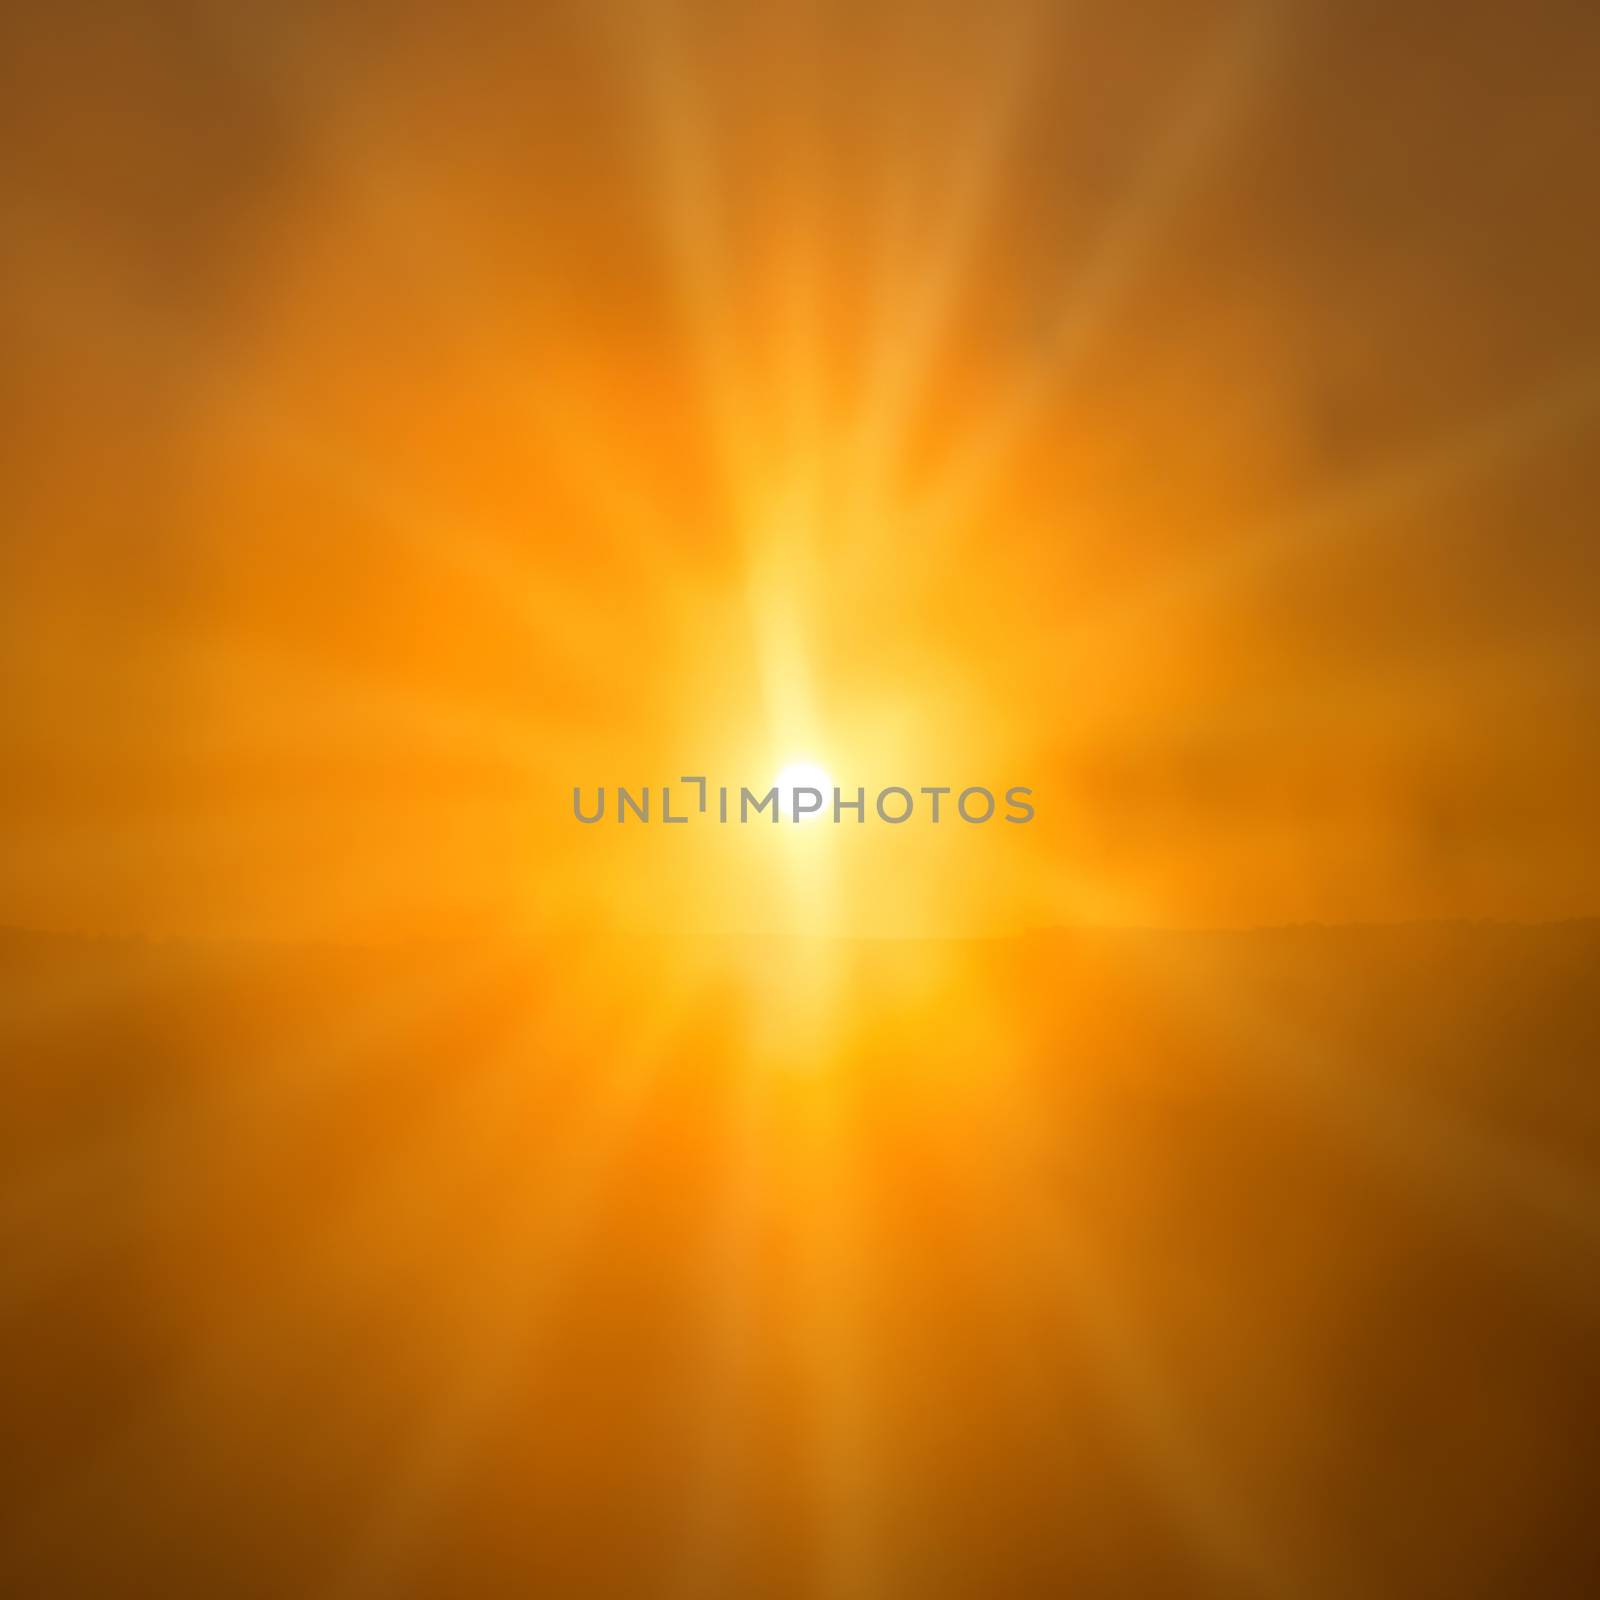 Abstract sunset- shining orange sun with sunbeams over sky background